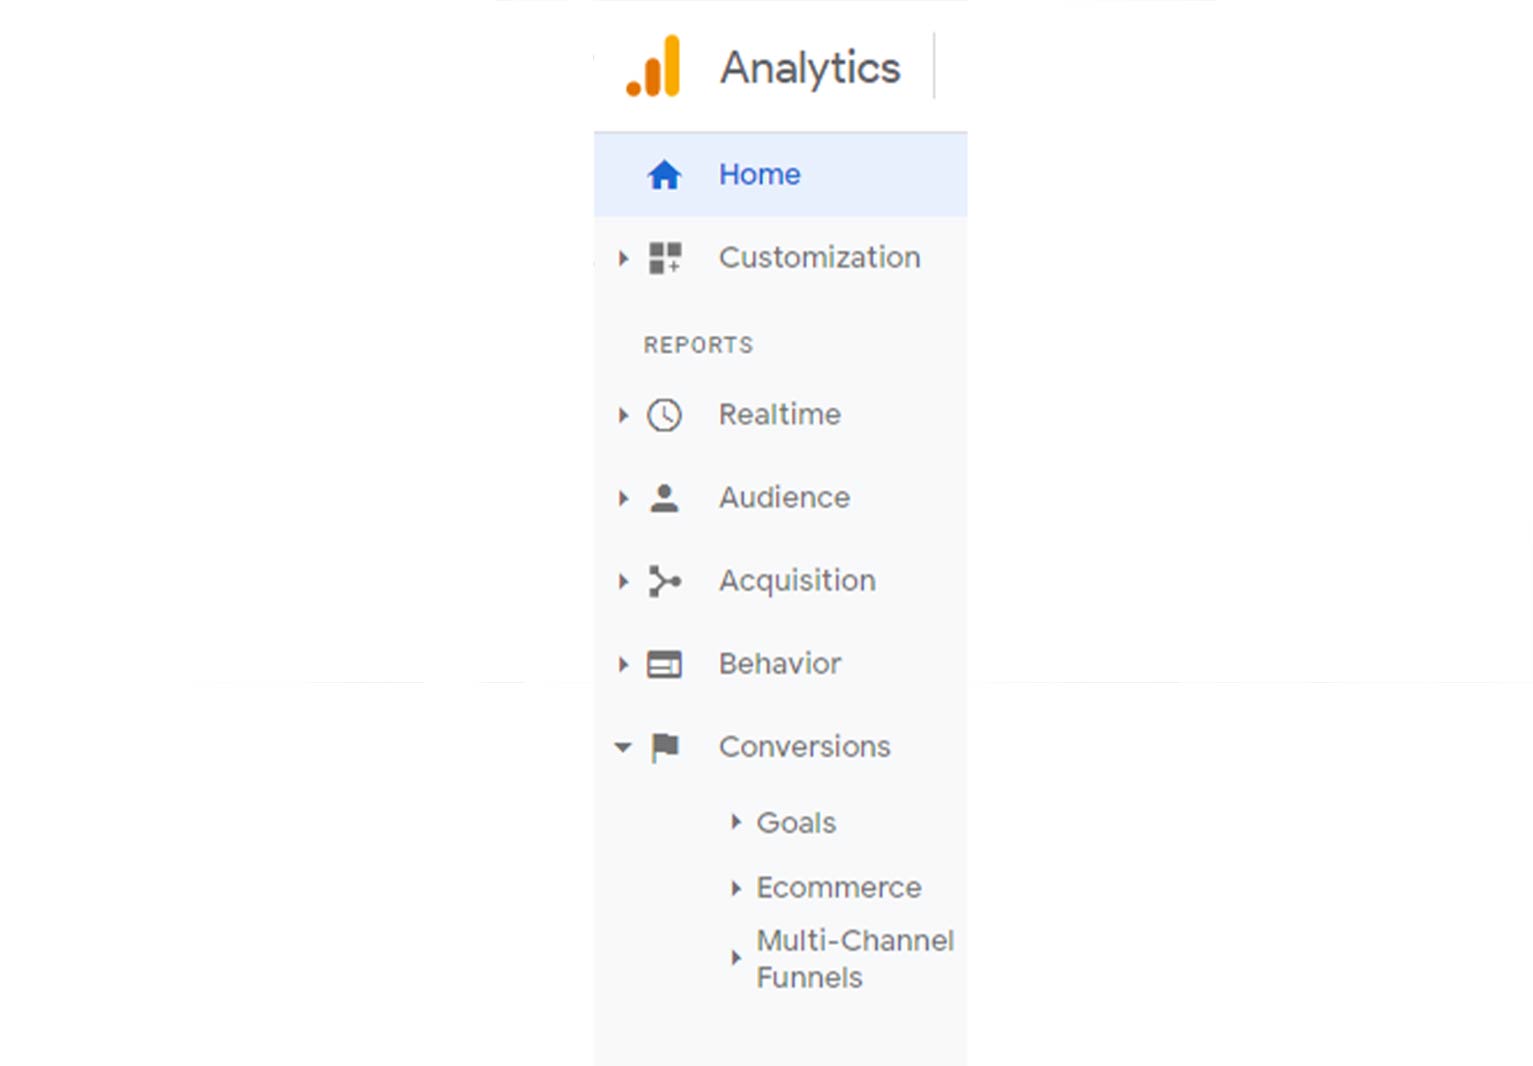 Image of Google Analytics sidebar displaying various reporting options, including realtime, audience, acquisition, behavior and conversions.